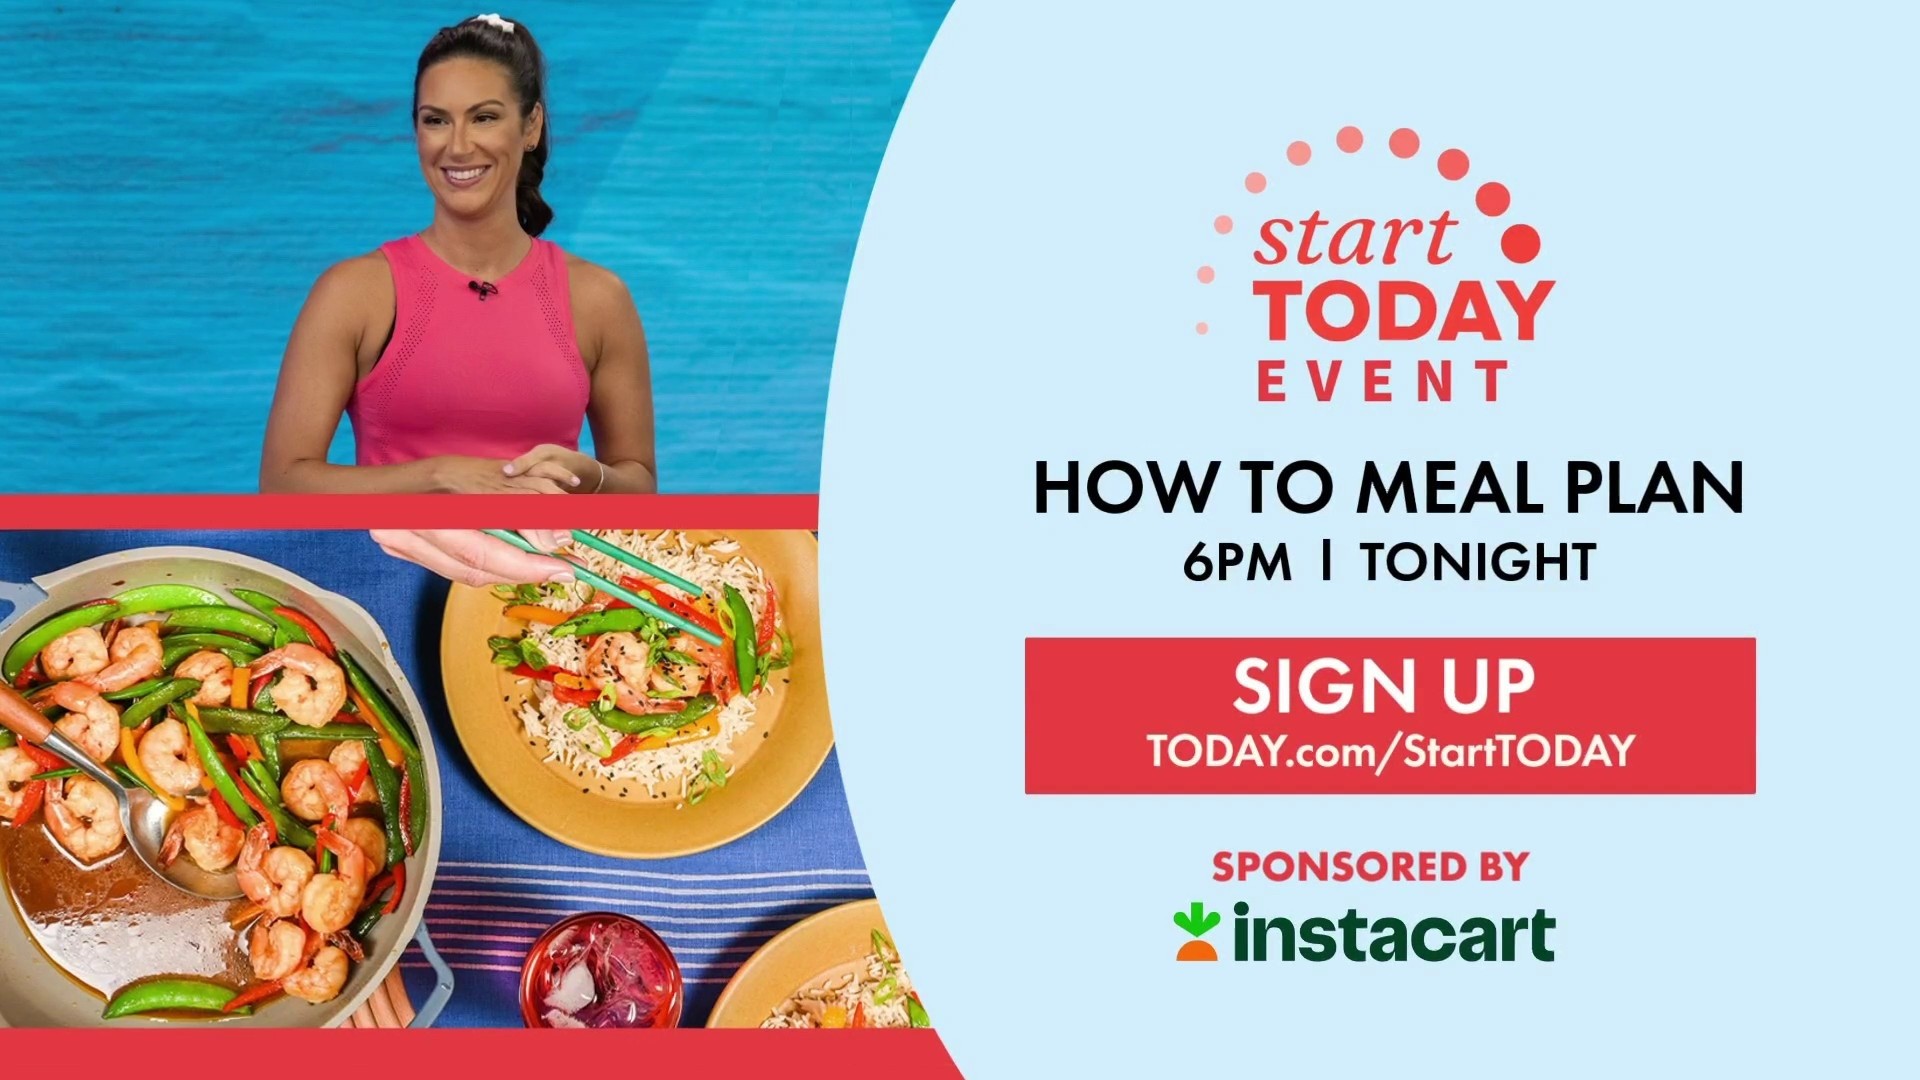 Stephanie Mansour to host meal-prepping Start TODAY event